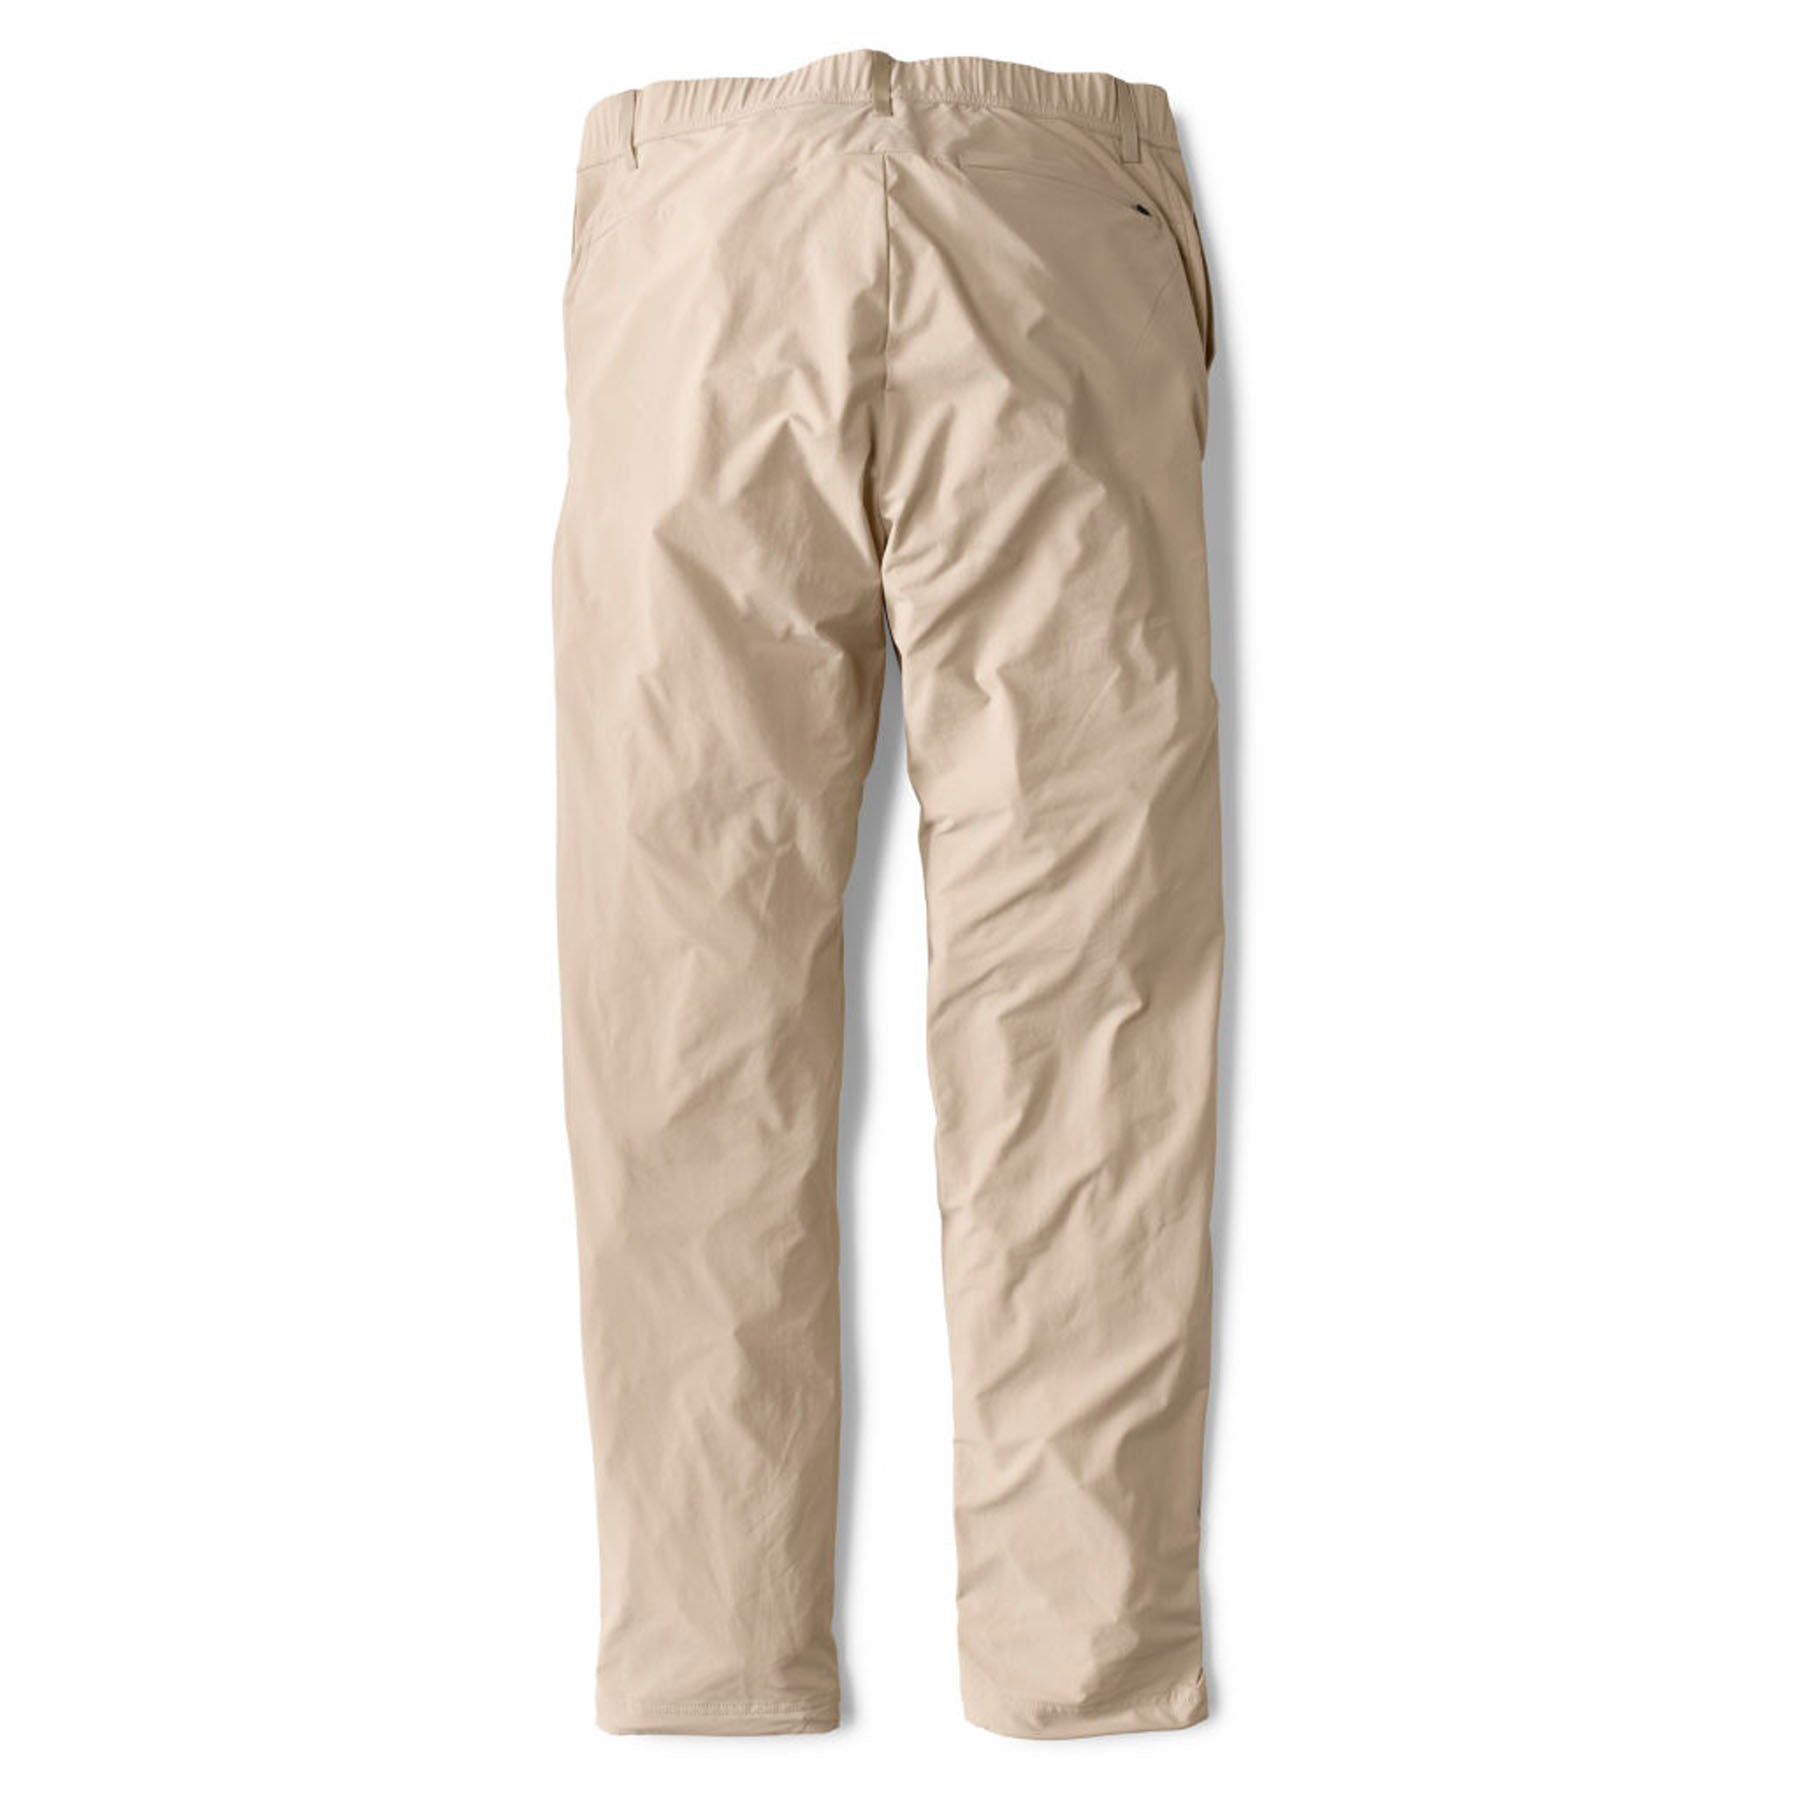 Orvis Pro Toughshell Pant - Fin & Fire Fly Shop